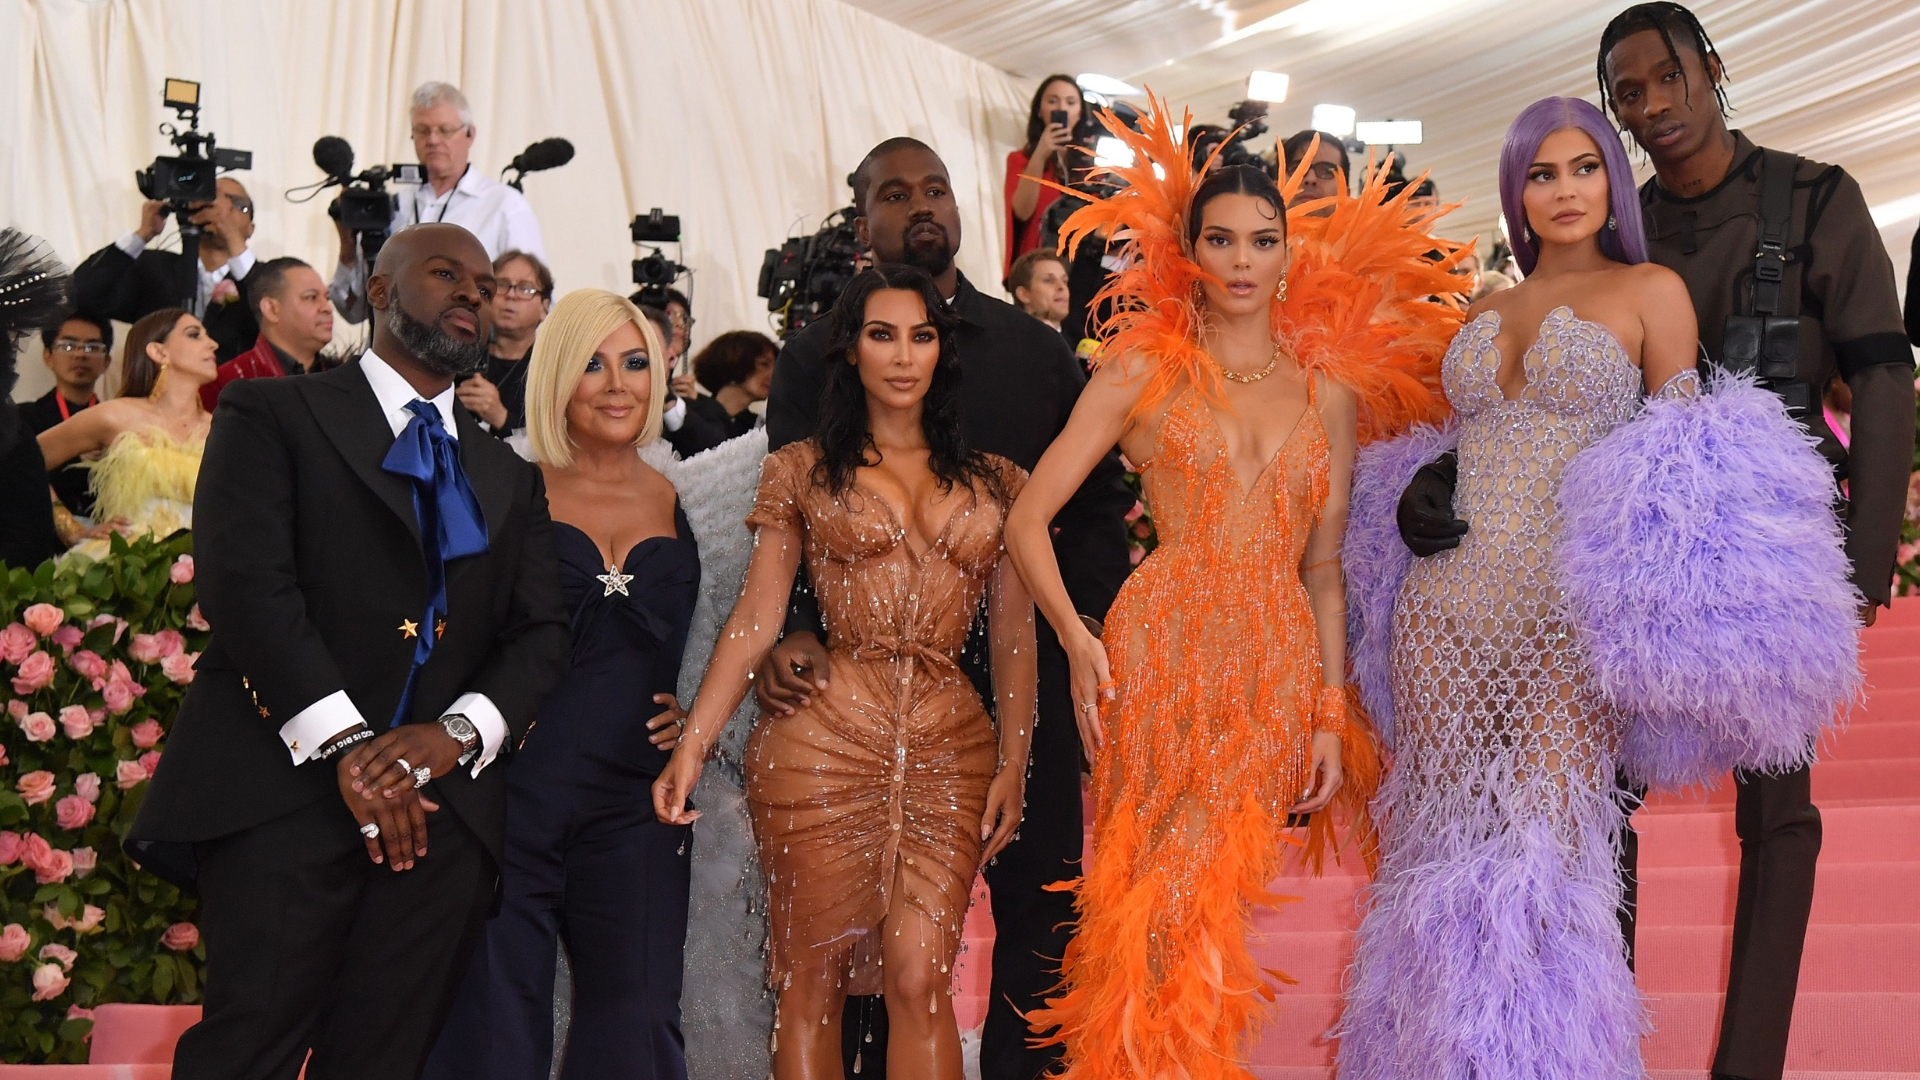 A Closer Look At What The Kardashians Wore At The 2019 Met Gala